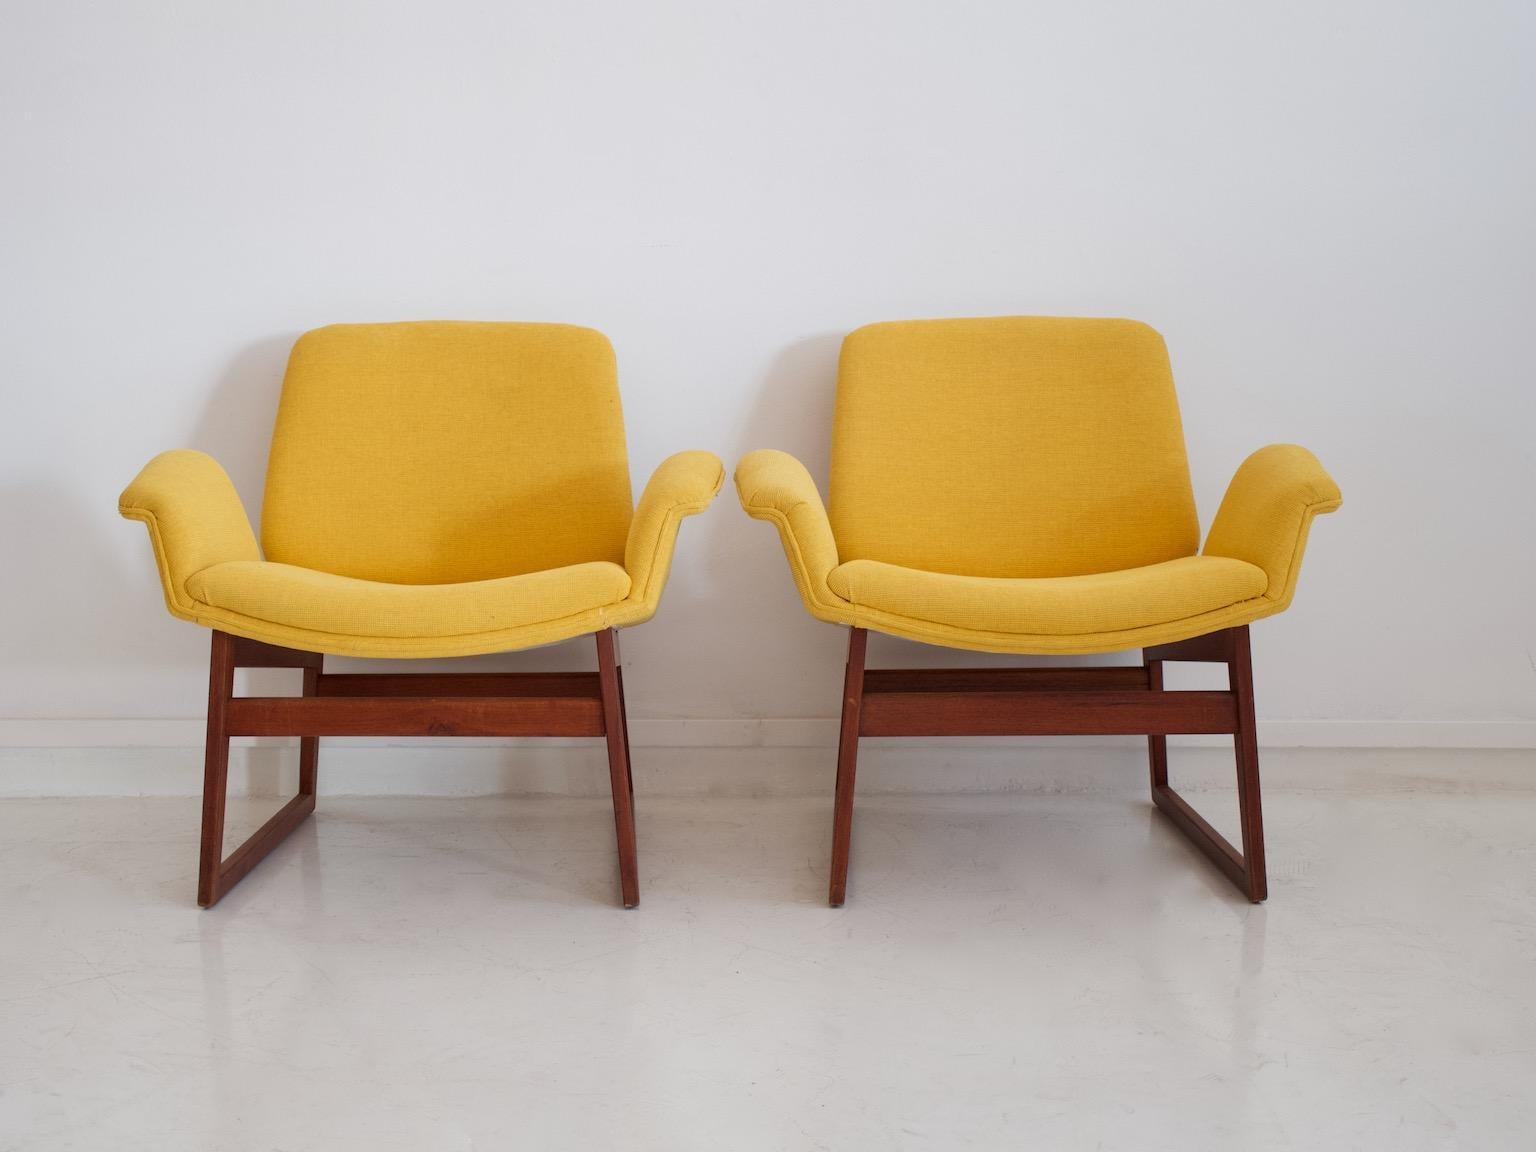 Pair of armchairs with teak structure and fabric covers designed by Illum Wikkelsø. Produced by Arflex in Italy, circa 1960.